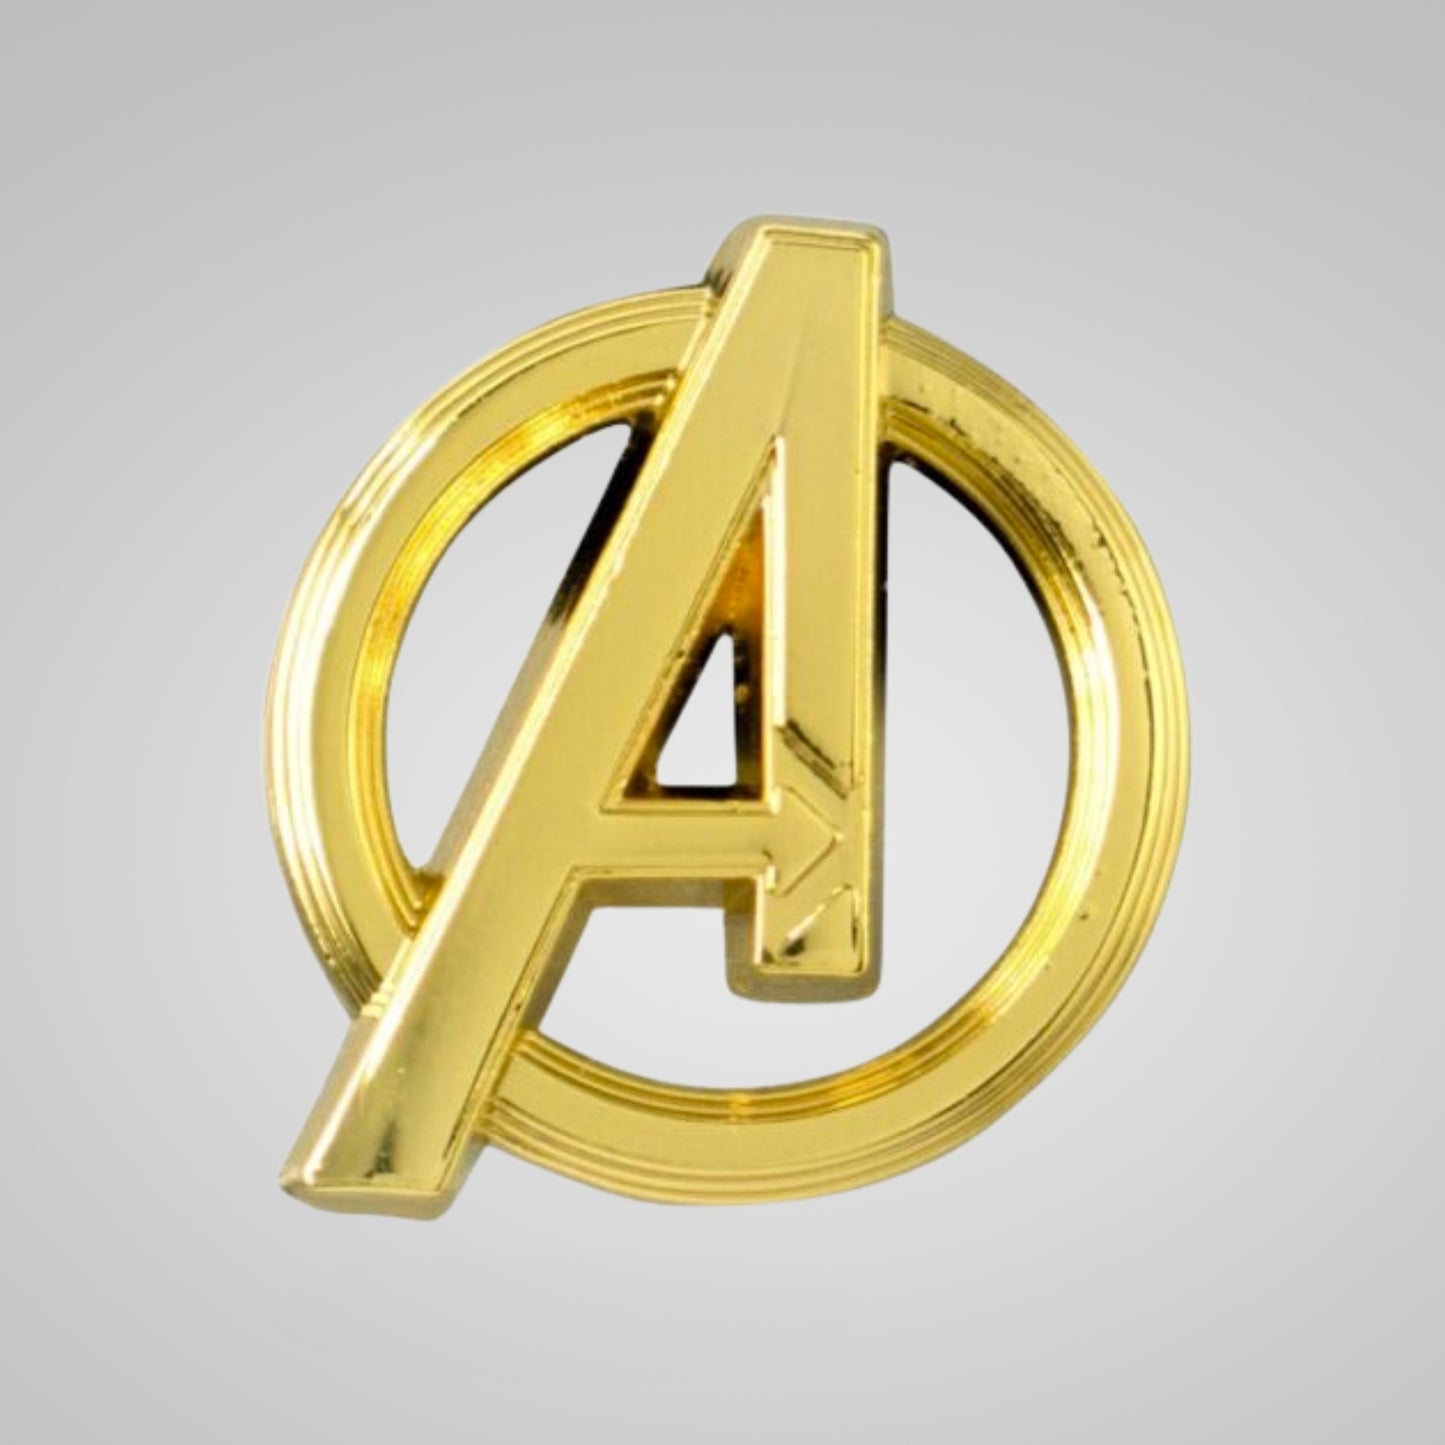 Load image into Gallery viewer, Avengers Logo (Marvel Comics) Gold Lapel Pin
